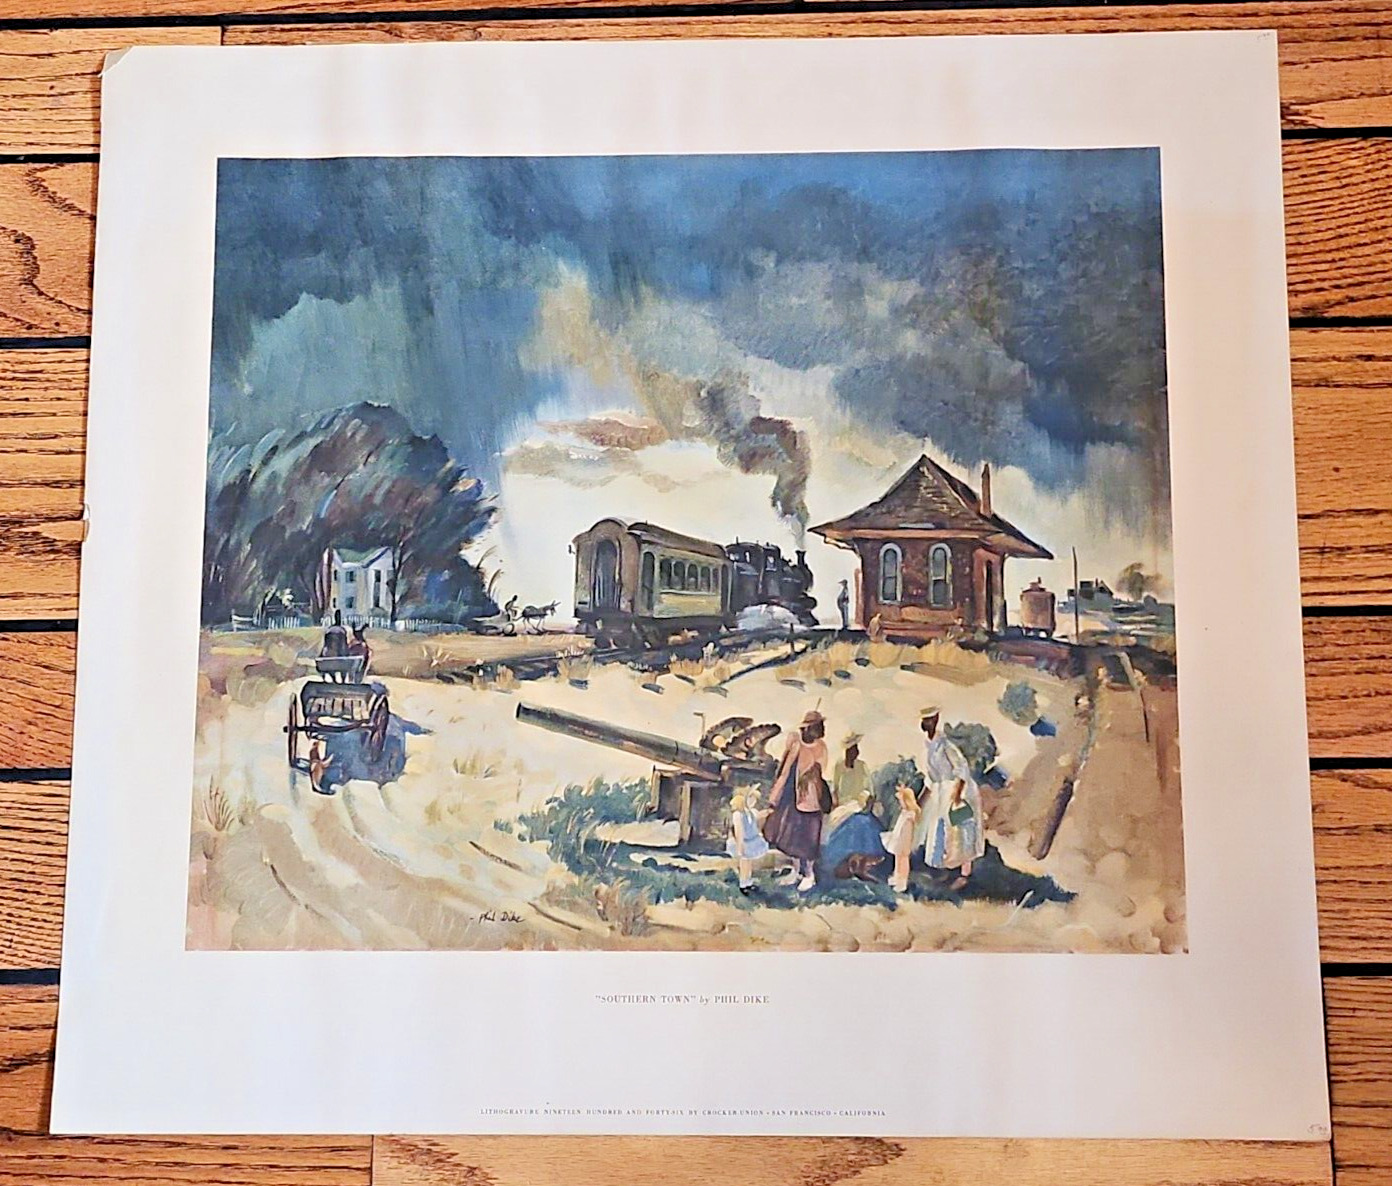 Rare 1946 Lithograph - Colorful Black Americana SOUTHERN TOWN by PHIL DIKE 20x16